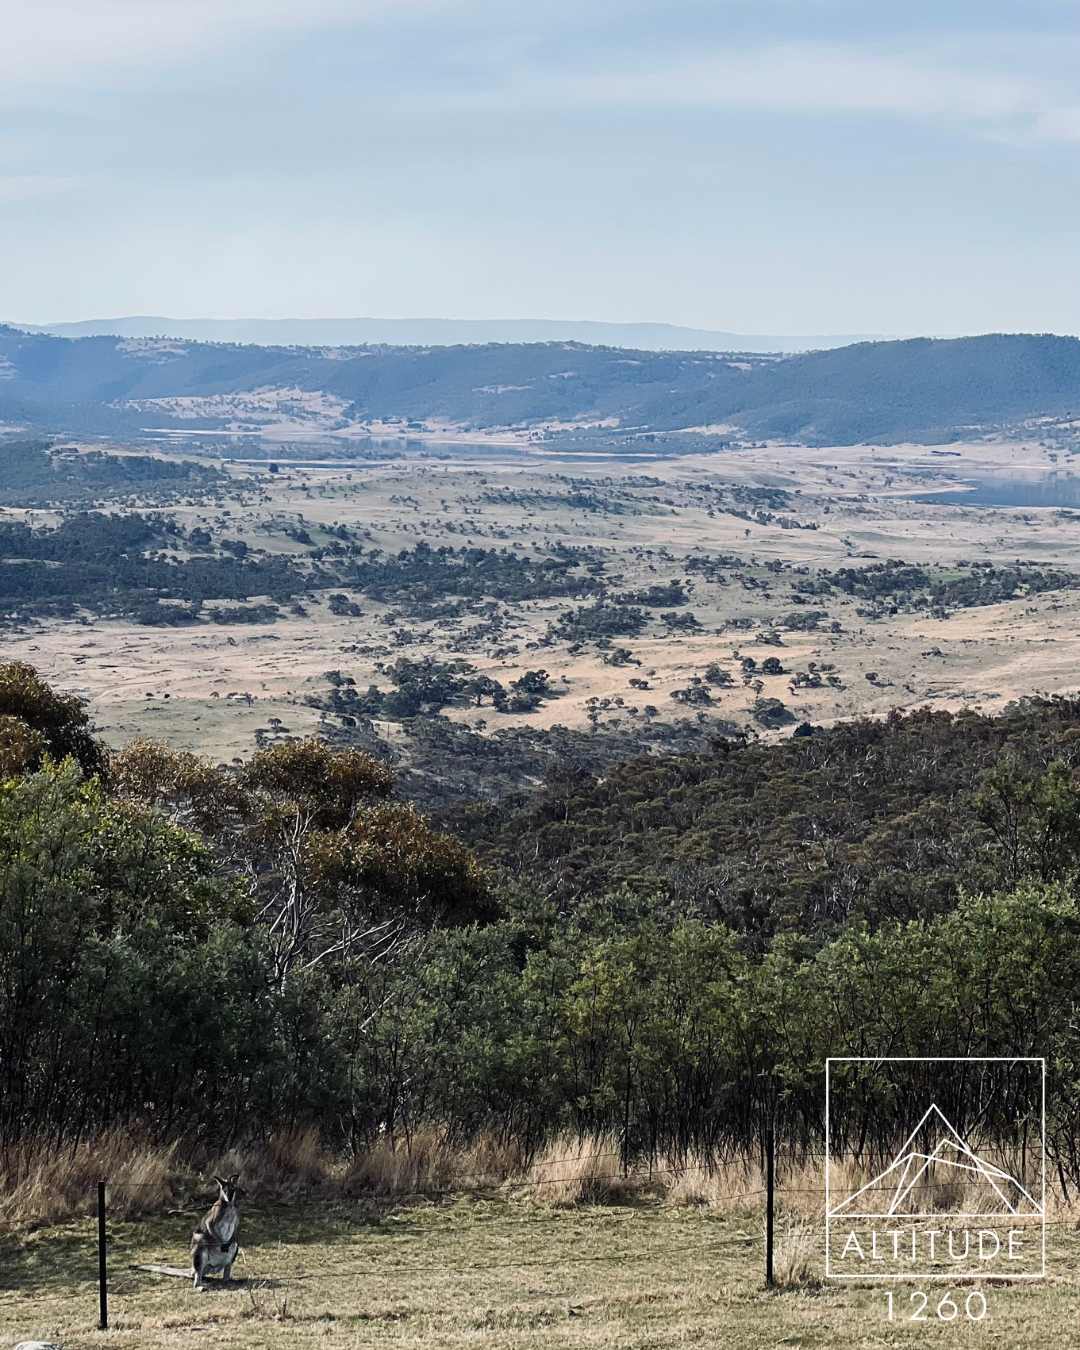 Altitude 1260 is a family-run lodge located on over 255 acres of natural bushland operating all year round. Altitude 1260 boasts breath-taking panoramic views from Lake Jindabyne through to the mountain peaks of Kosciuszko.